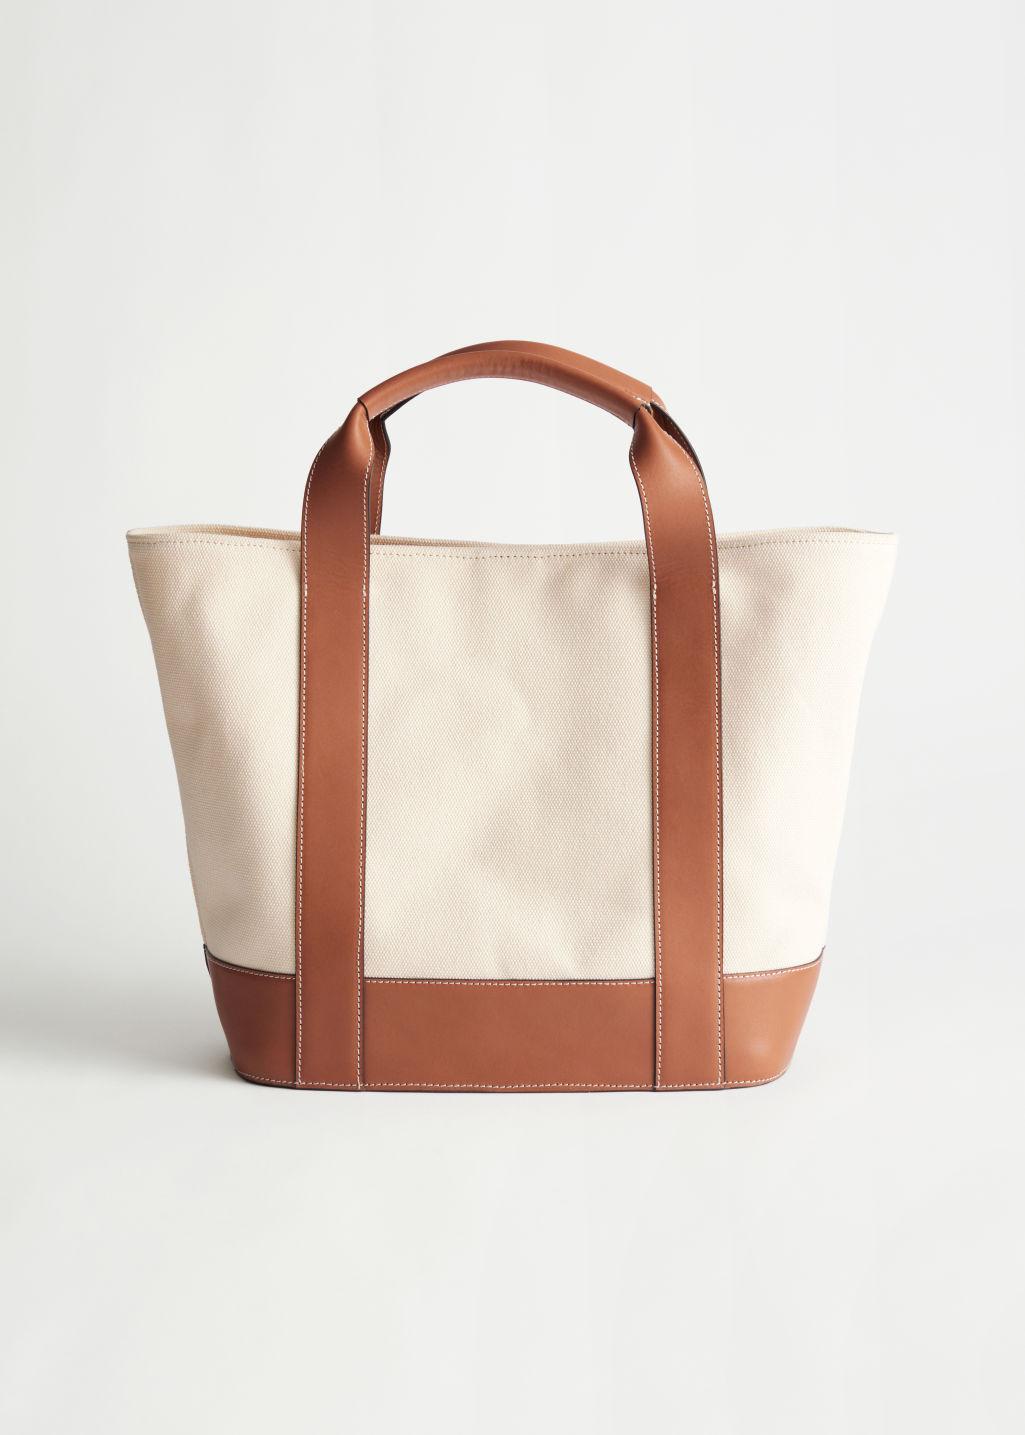 & Other Stories Canvas Leather Tote Bag in White | Lyst UK